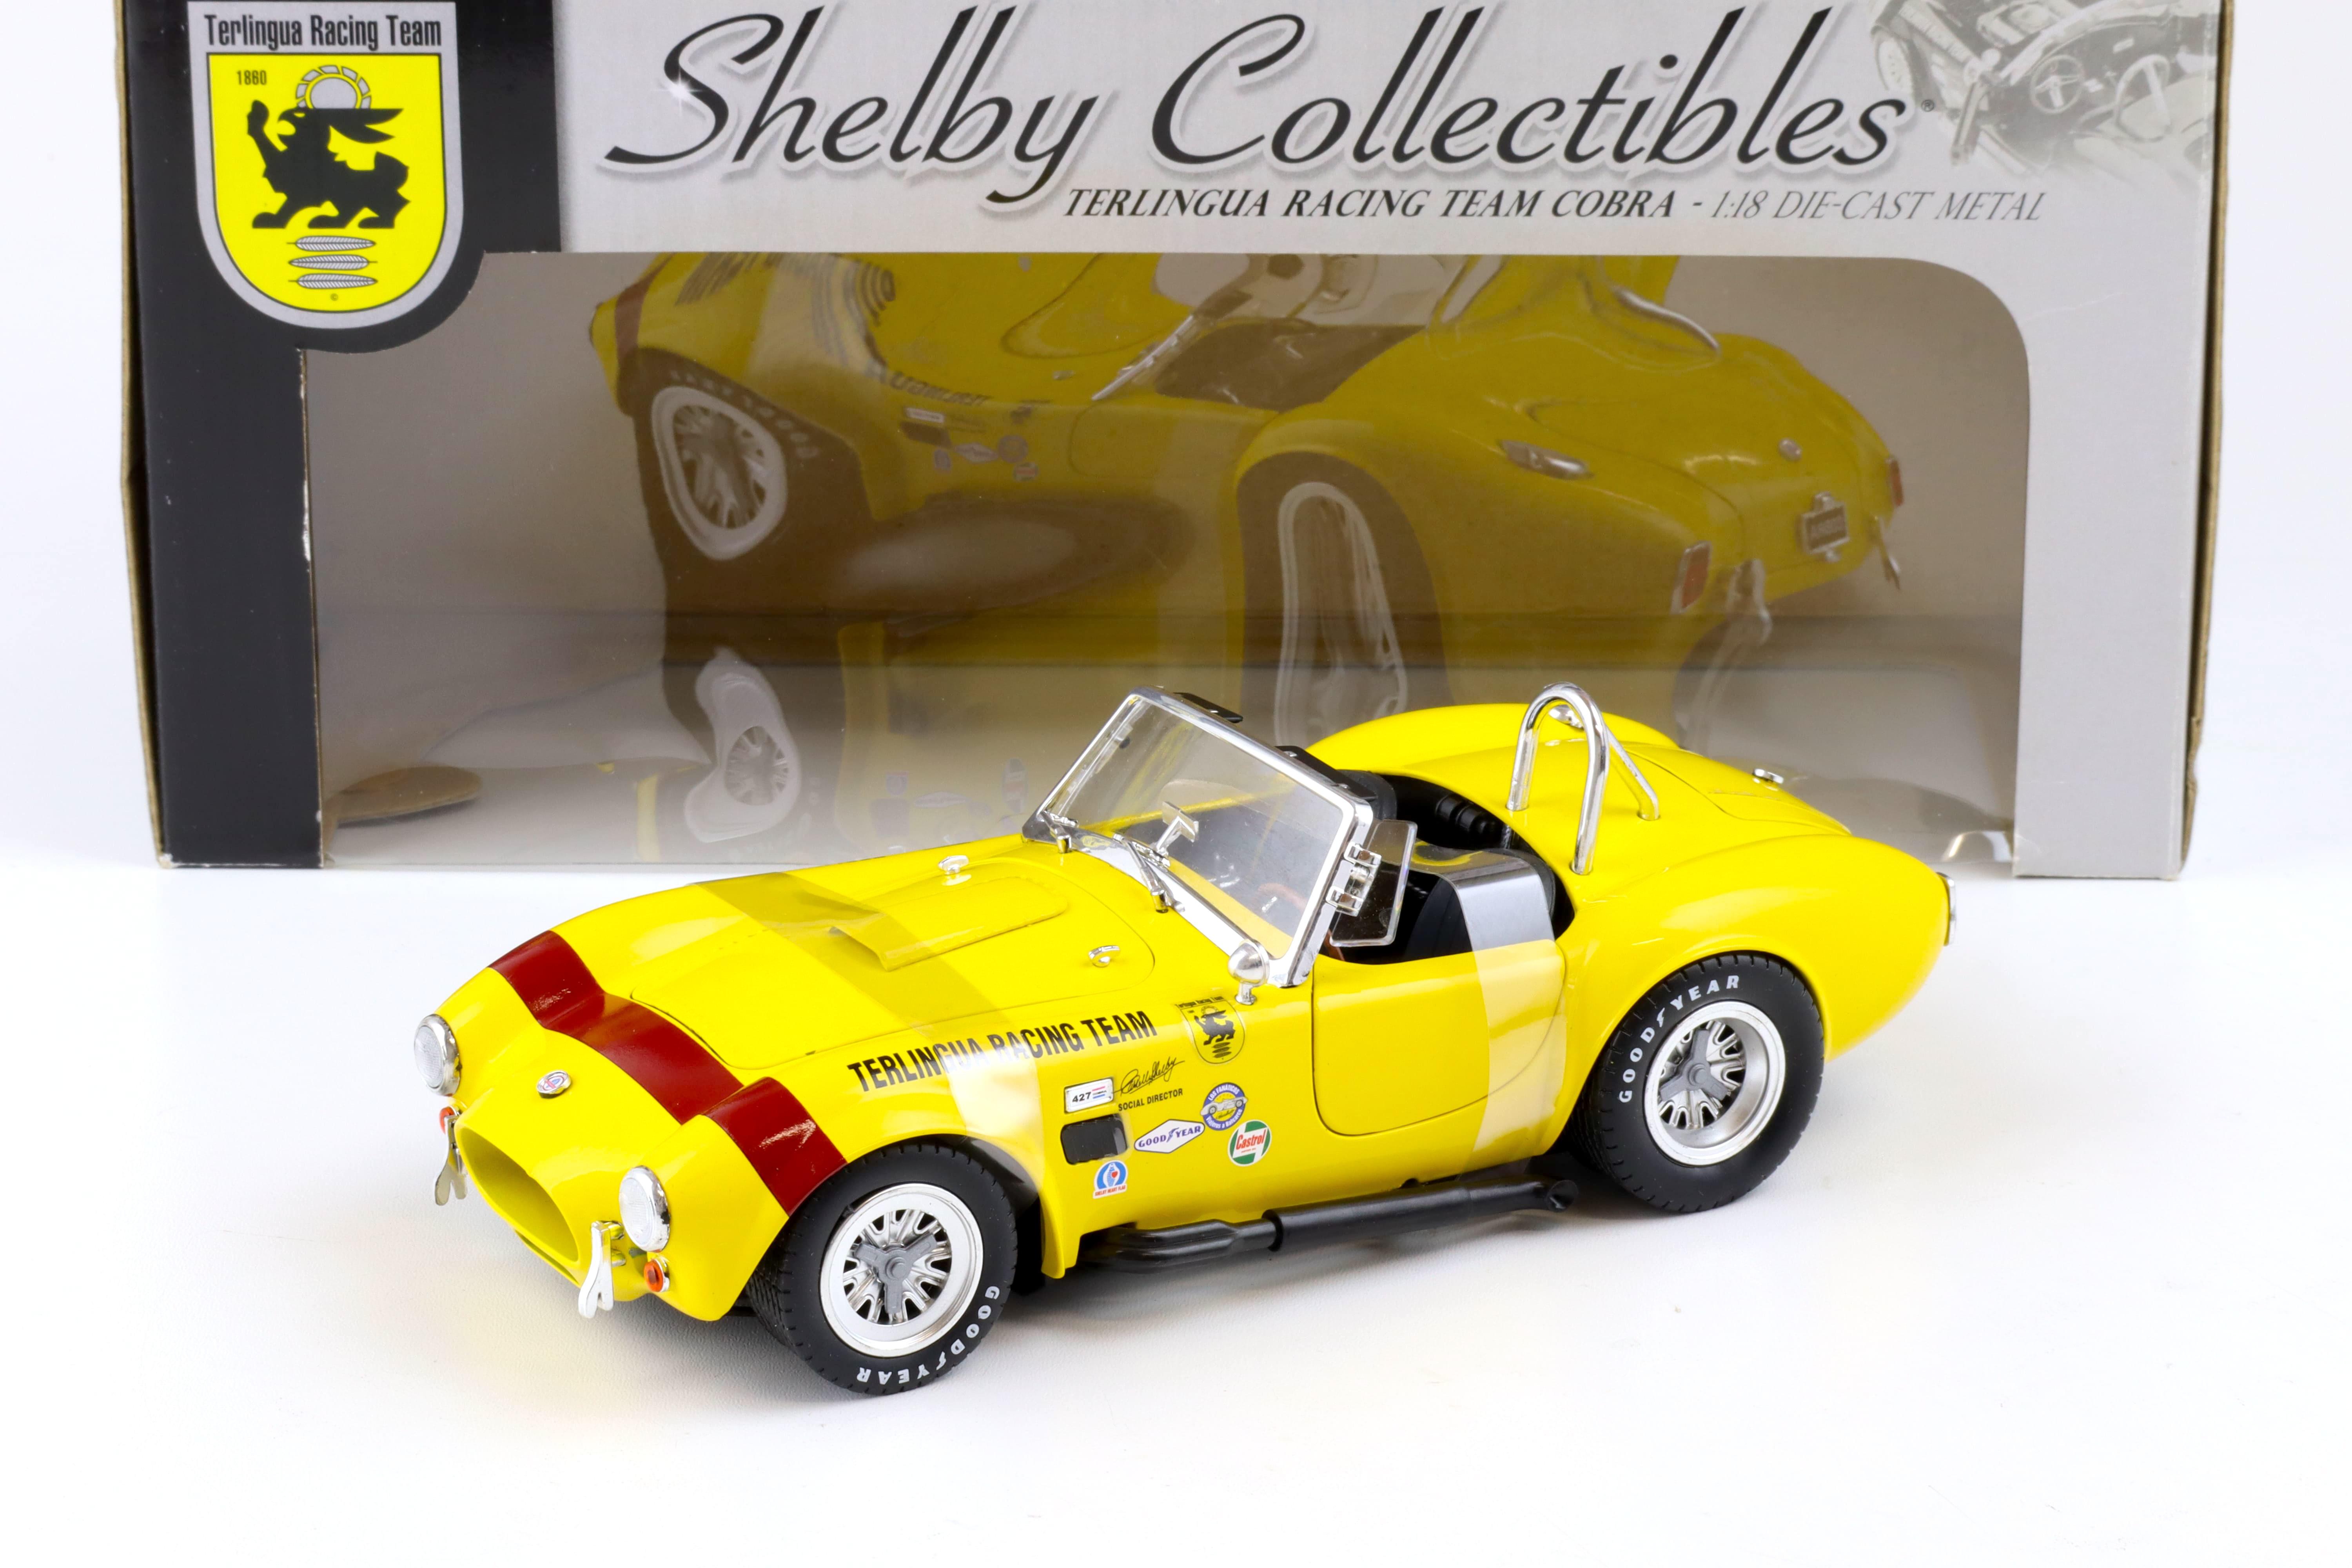 1:18 Shelby Collectibles 1965 Shelby Cobra Terlingua Racing Team yellow/ red